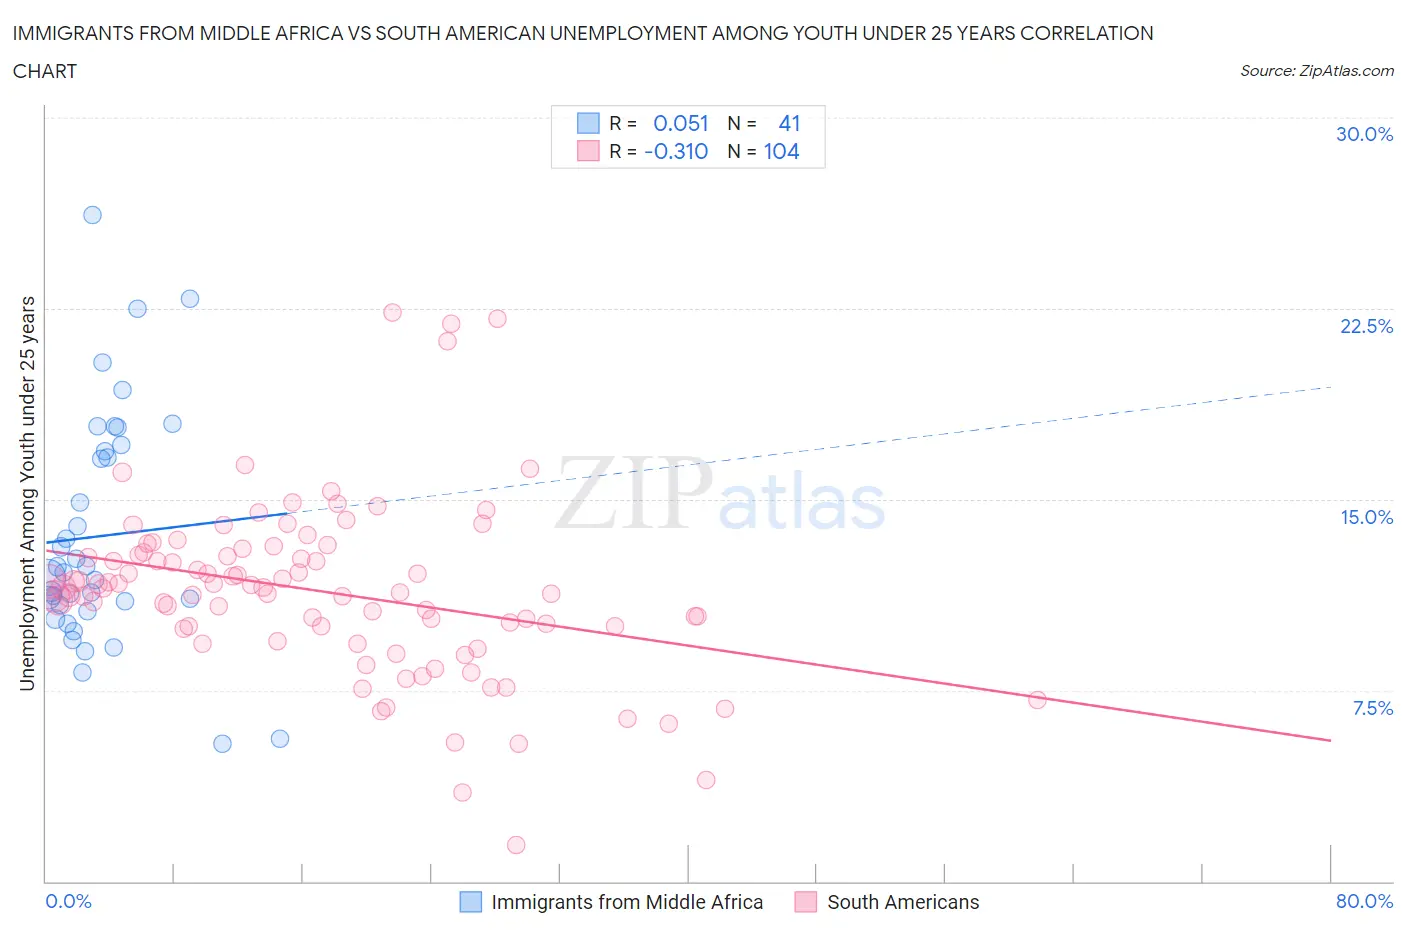 Immigrants from Middle Africa vs South American Unemployment Among Youth under 25 years